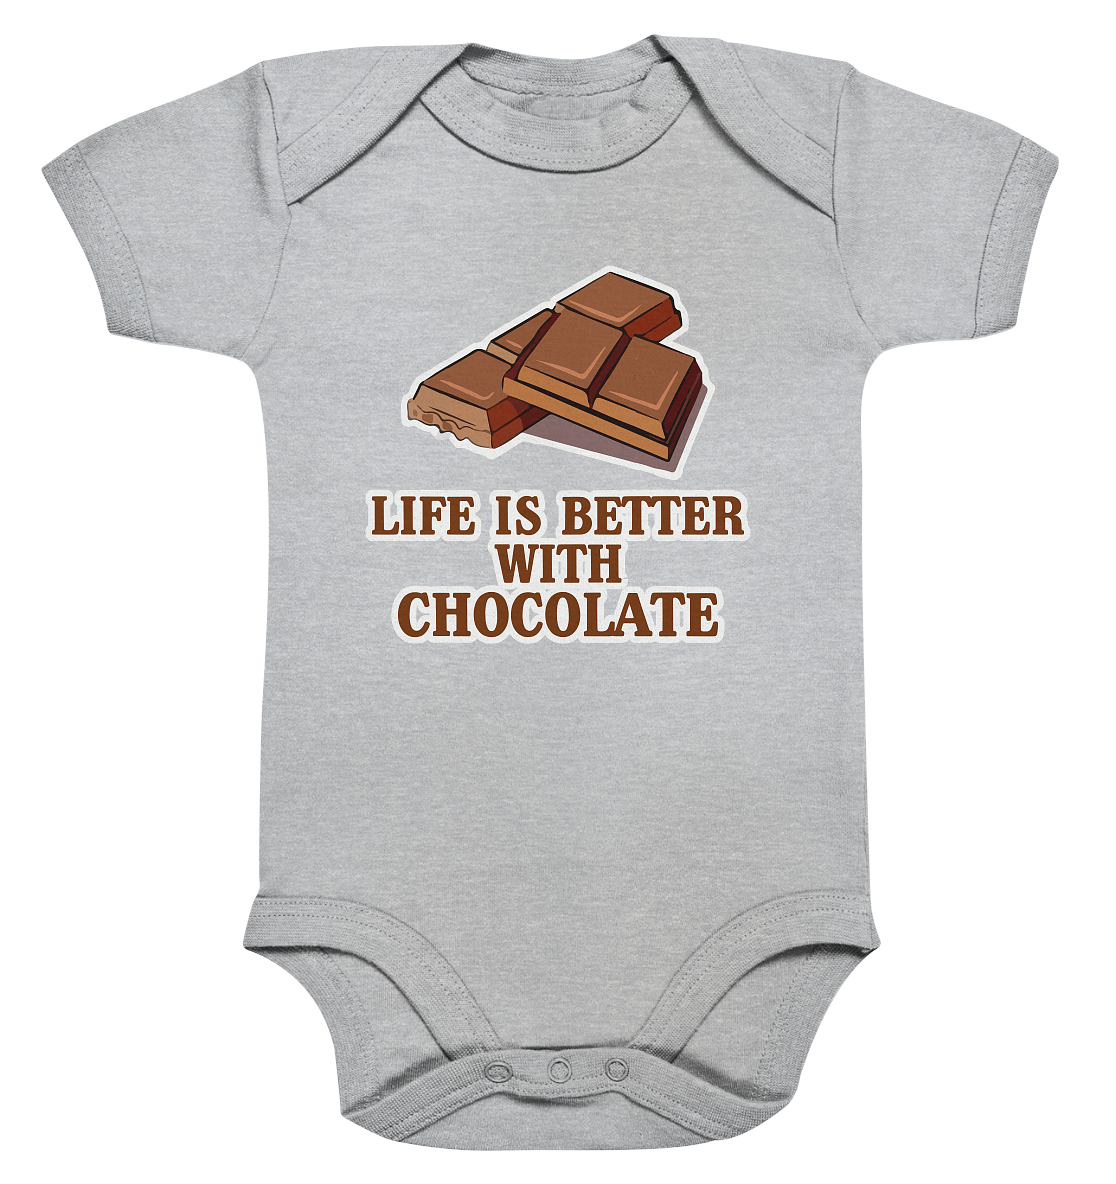 Life is better with chocolate - Organic Baby Bodysuite